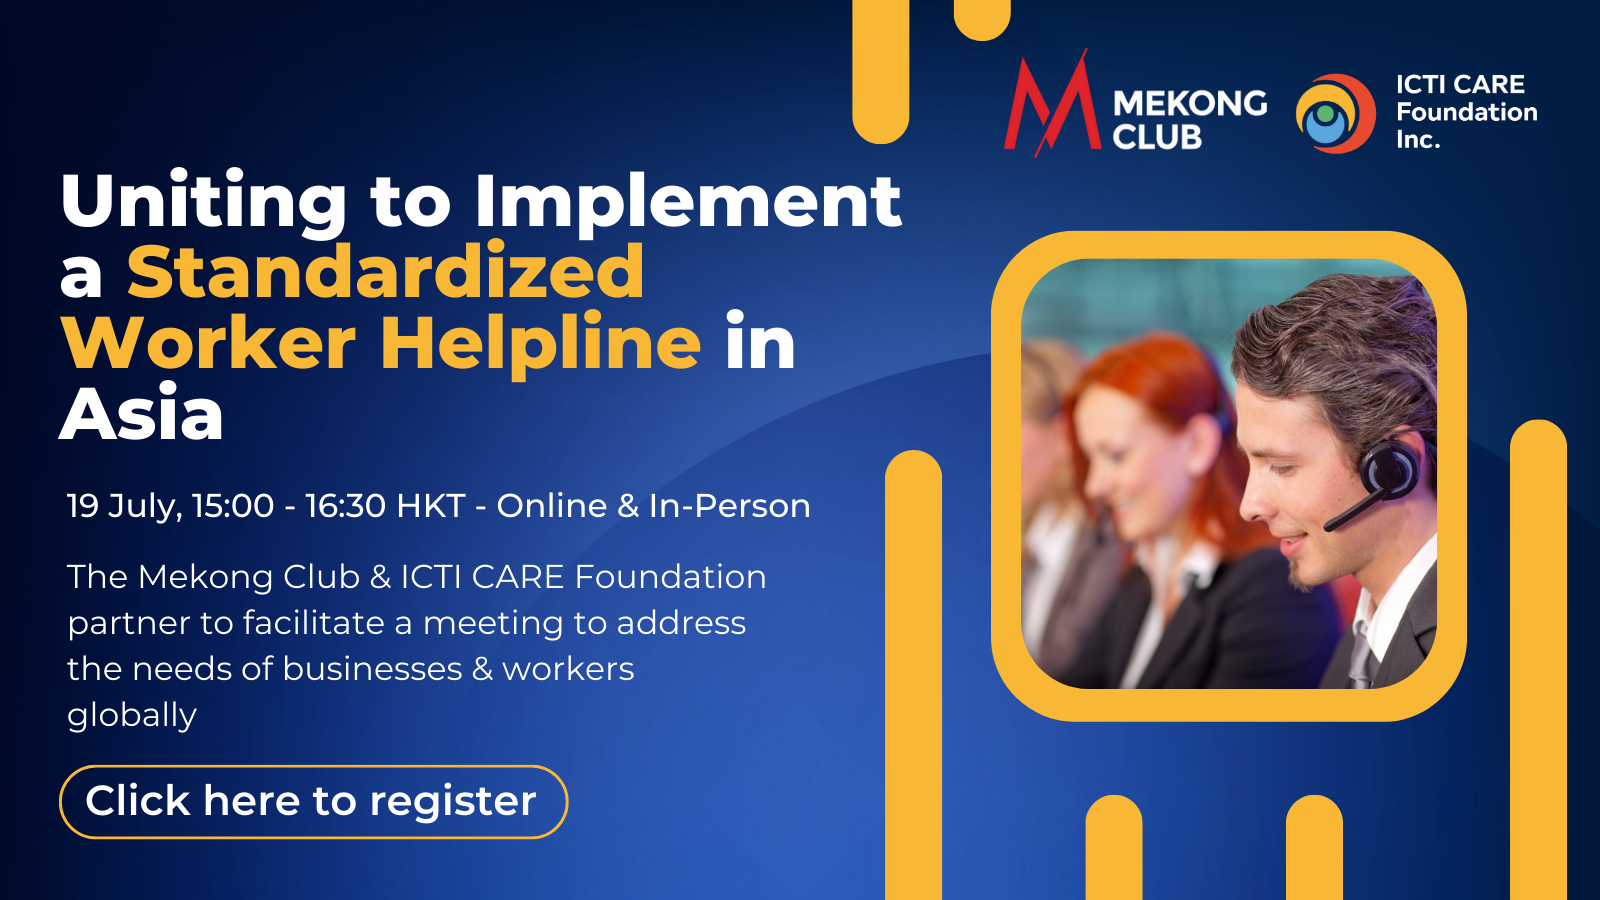 The Mekong Club & the ICTI CARE Foundation (ICF) are delighted to invite you to a meeting to discuss the importance of effective grievance channels in workplaces across Asia and specifically how to expand the existing ICF Worker Helpline to provide an effective solution for companies.